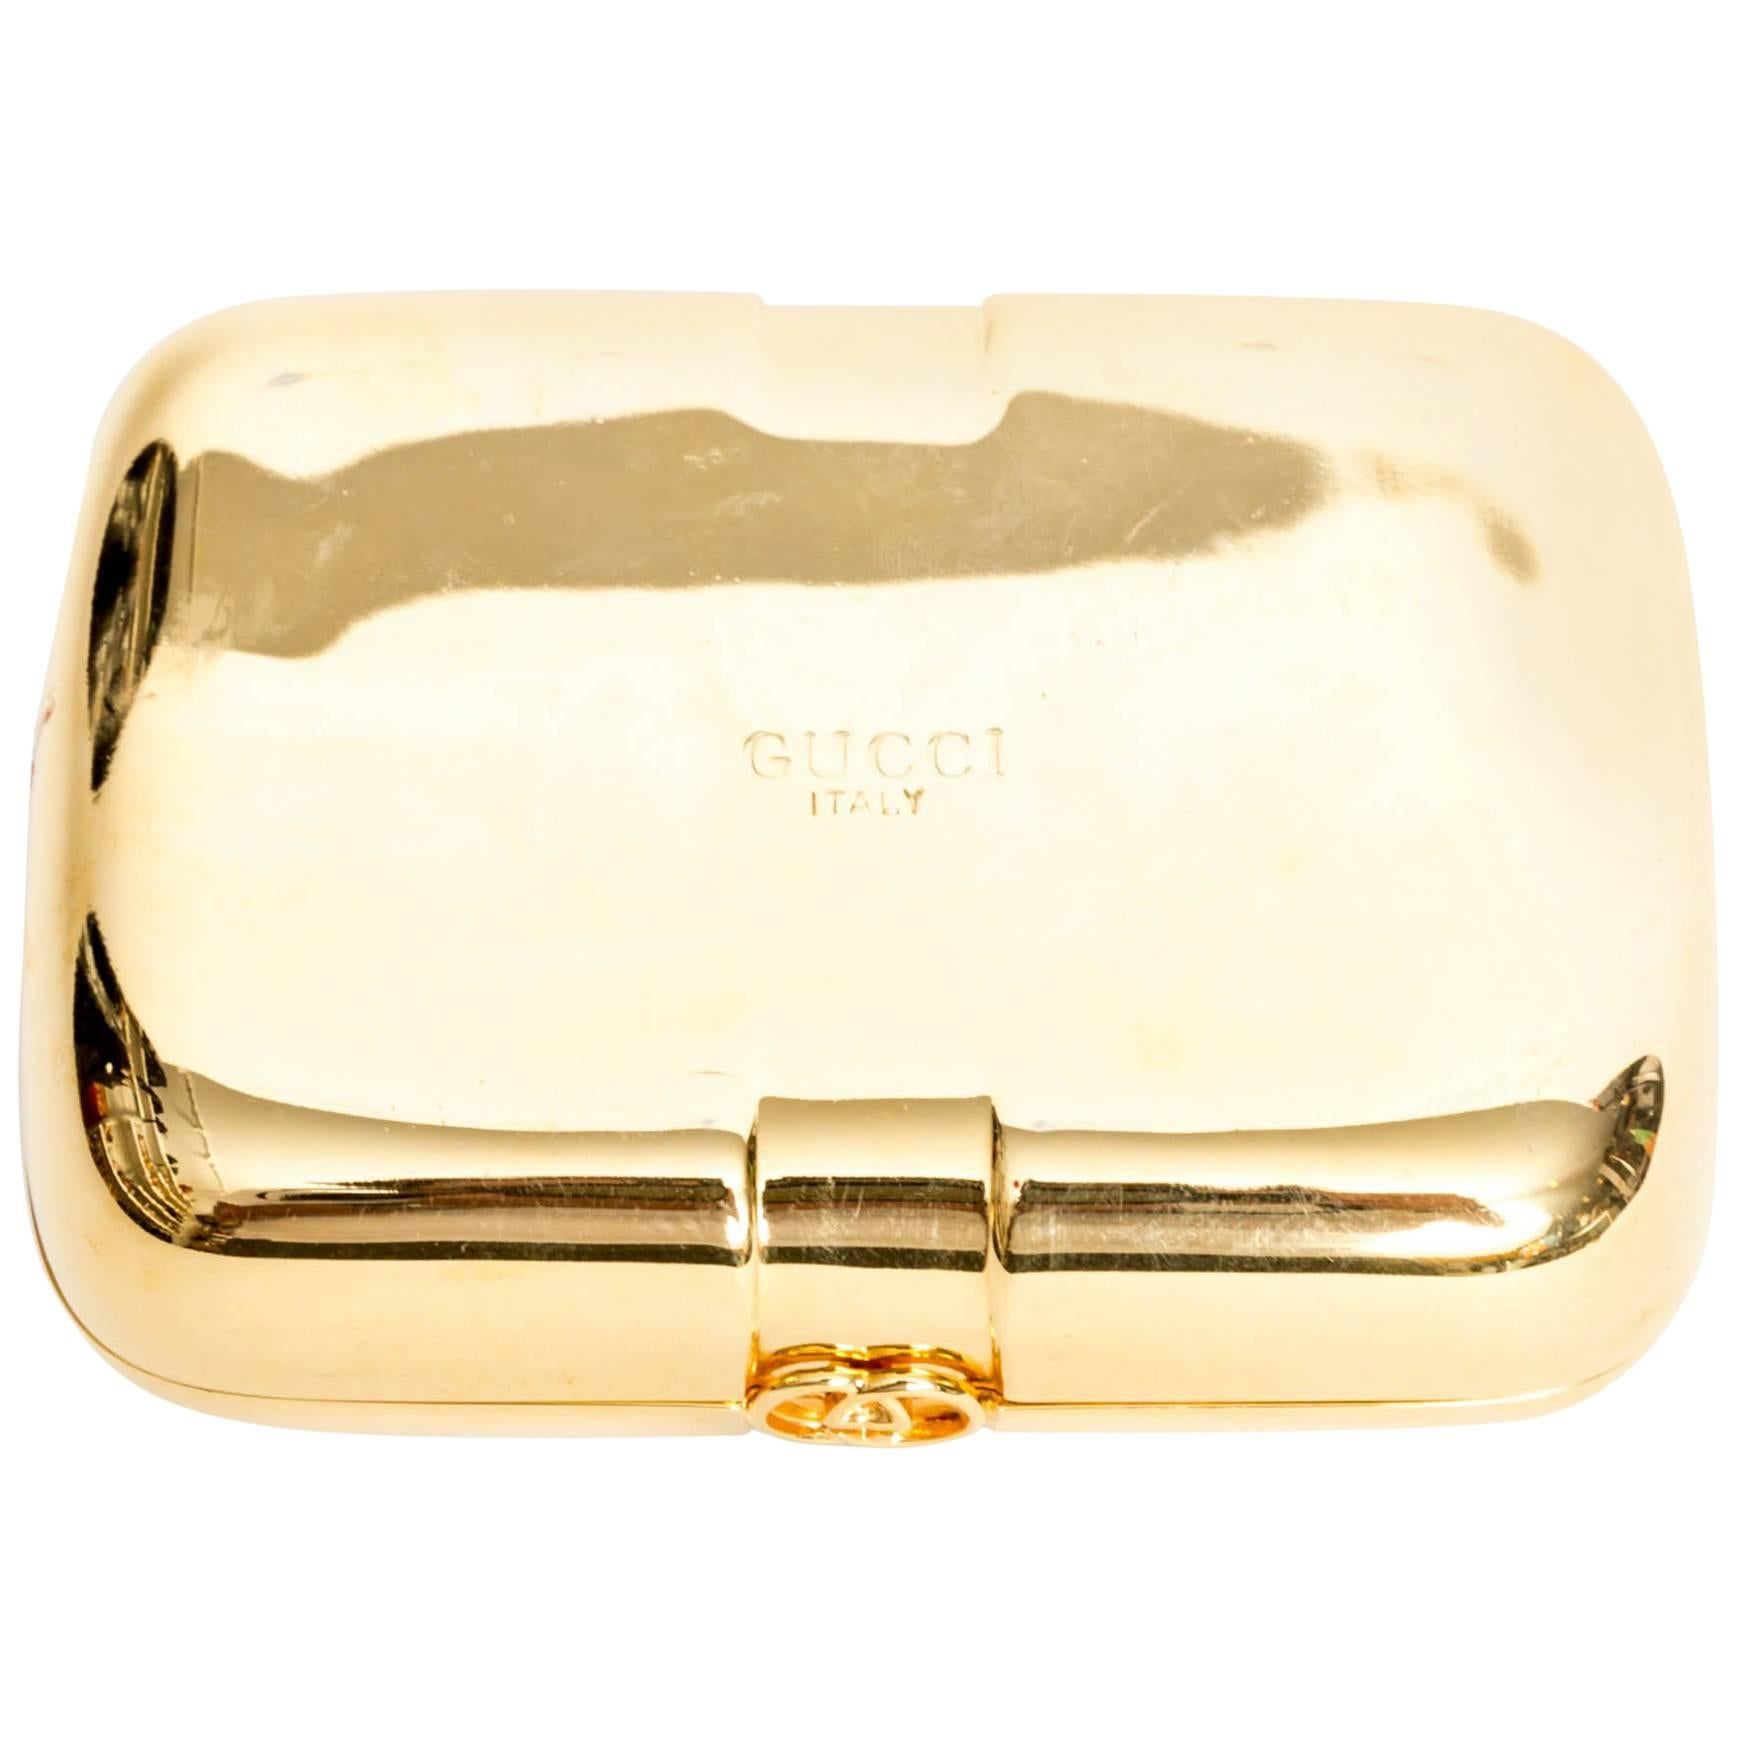 Vintage Gold Gucci Card Holder / Small Clutch